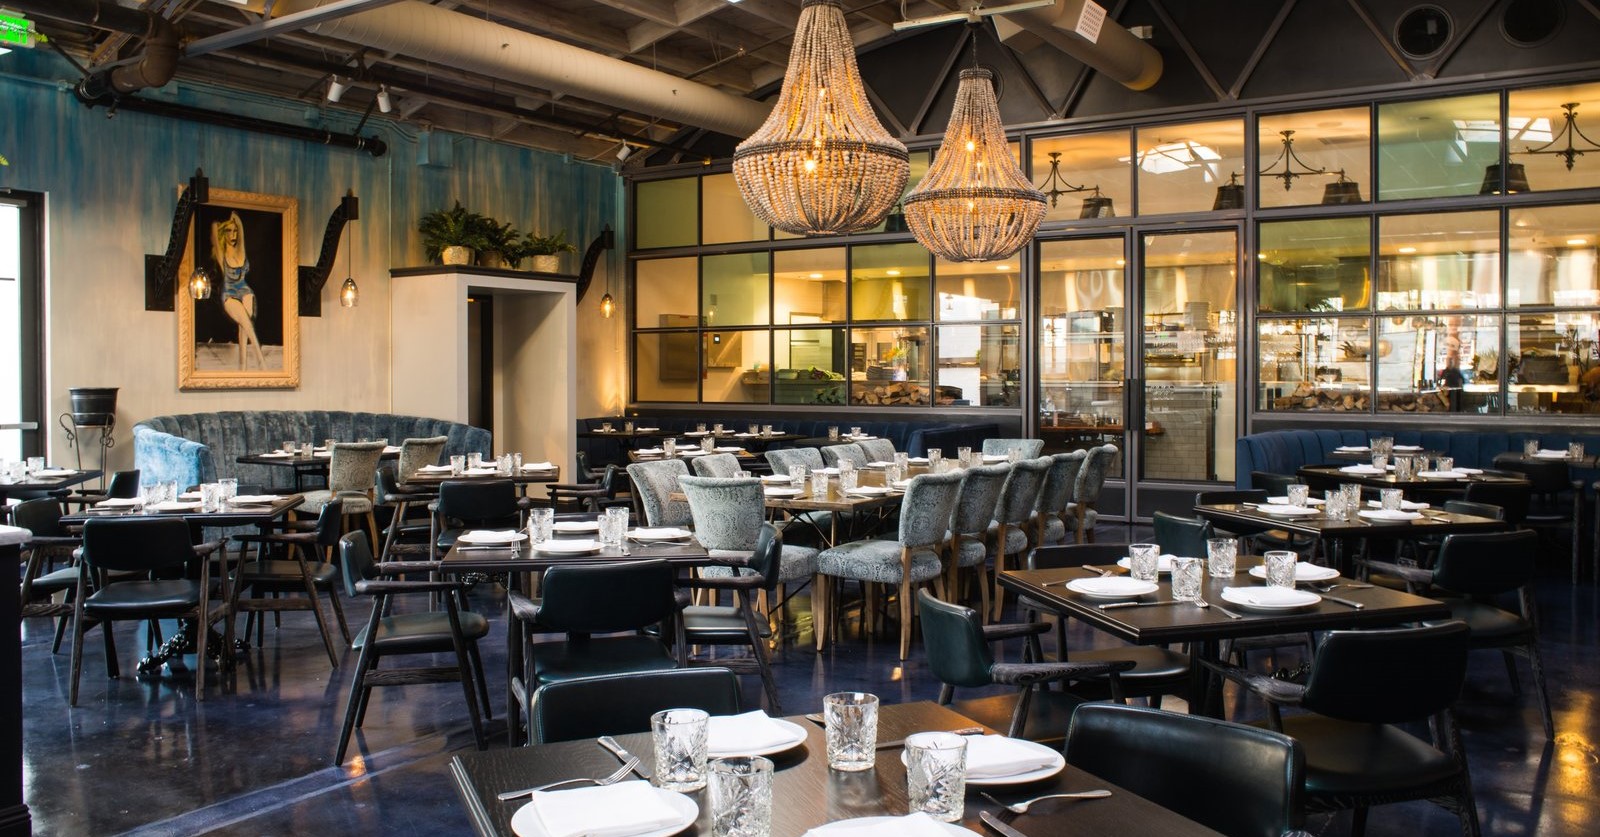 Tables and chairs fill the airy dining room of Herb and Wood restaurant in San Diego.